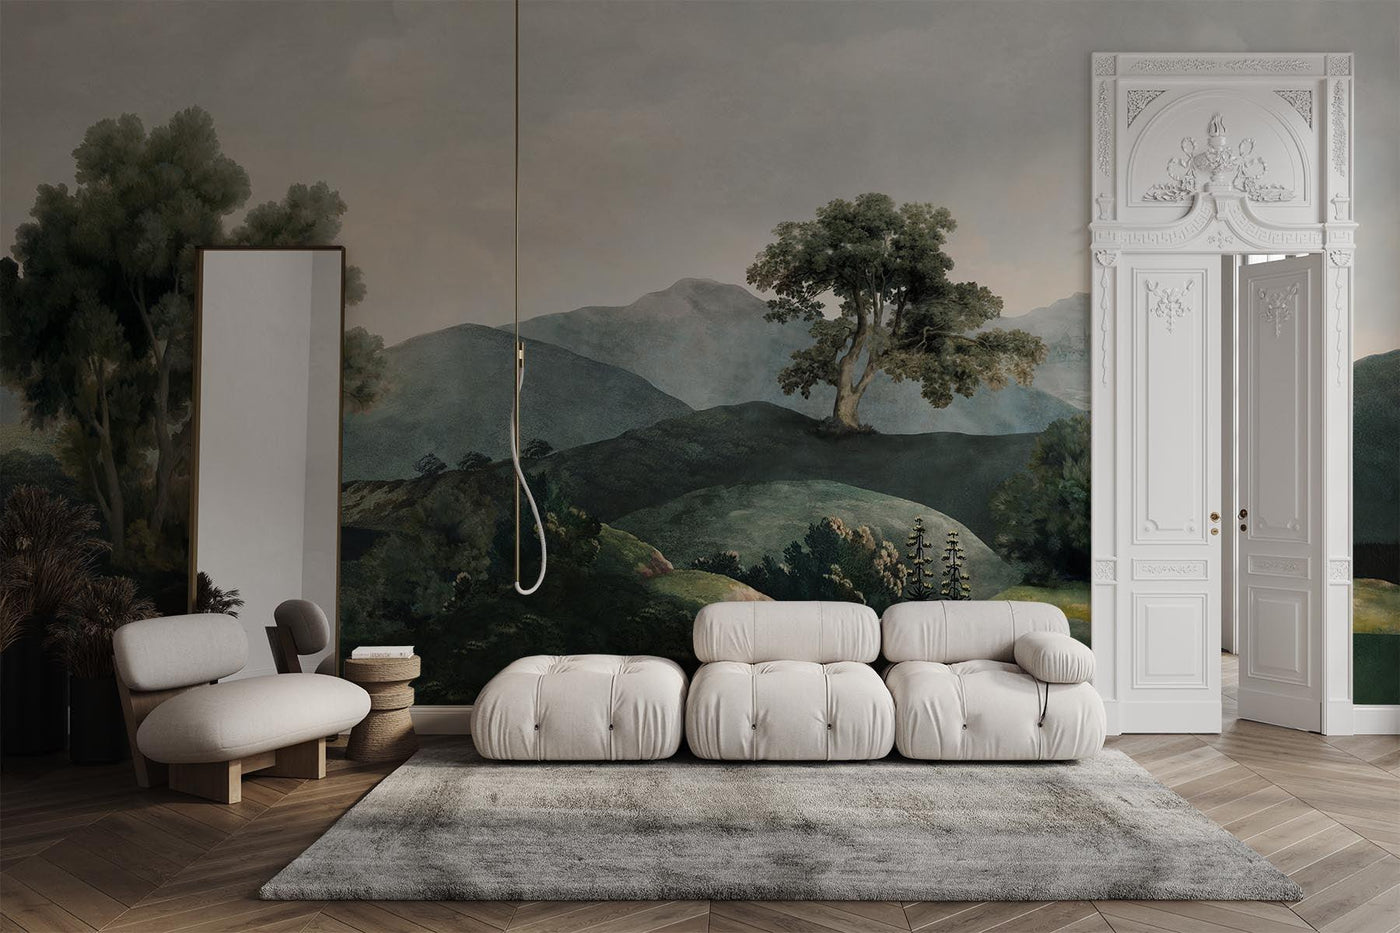 Living room wall murals. Artistic, wood walls, florals, nature, botanical or artistic and graphic wall murals for your living room interior udpate